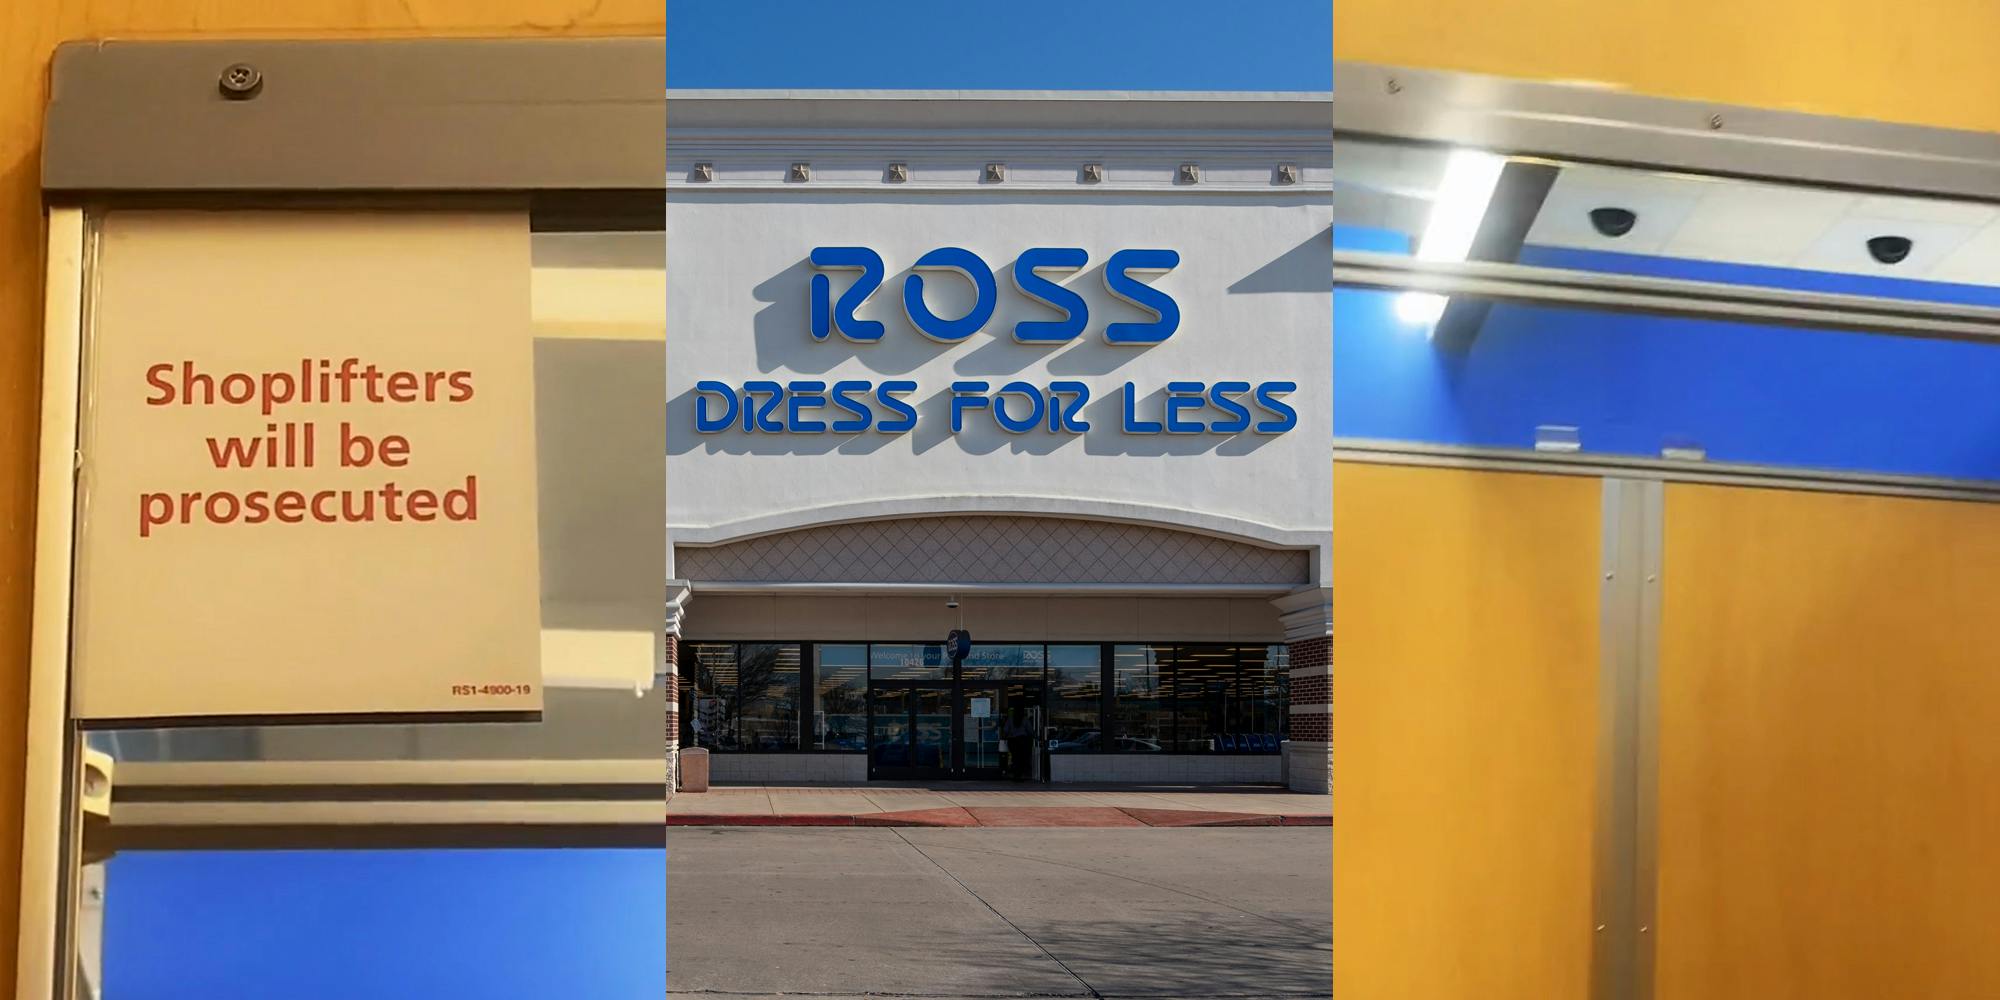 Ross dressing room with sign "shoplifters will be prosecuted" (l) Ross Dress For Less building with sign (c) Ross dressing room with cameras (r)